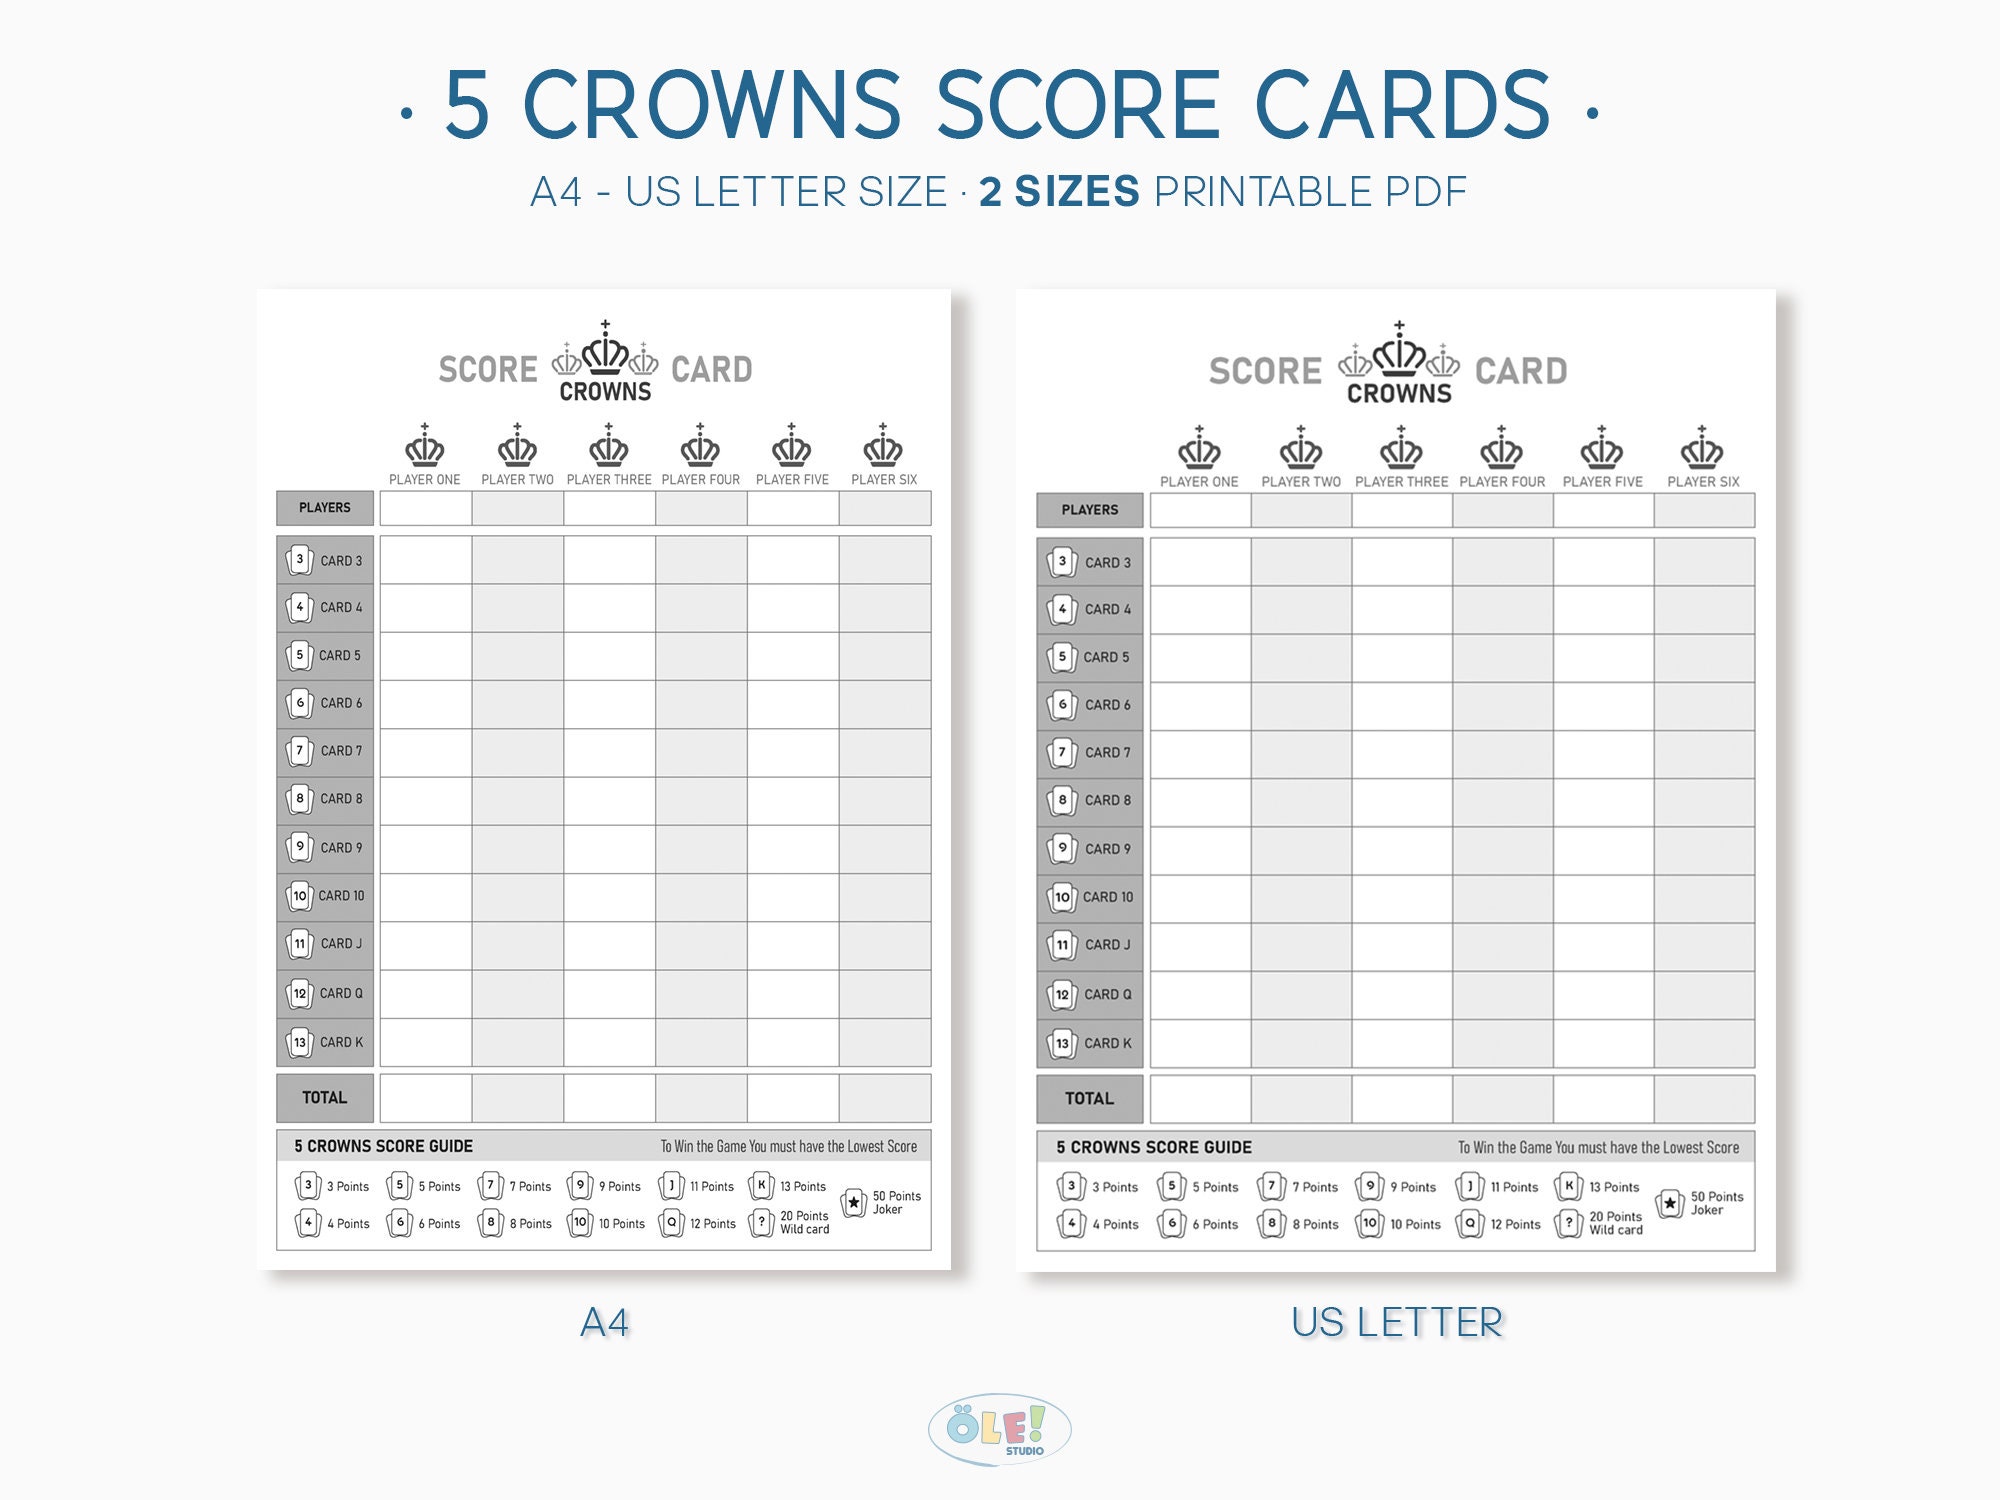 5 Crowns Score Sheet Book: 100 Personal Score Sheets for Scorekeeping, Five  Crowns Card Game Score Cards a book by Nisclaroo